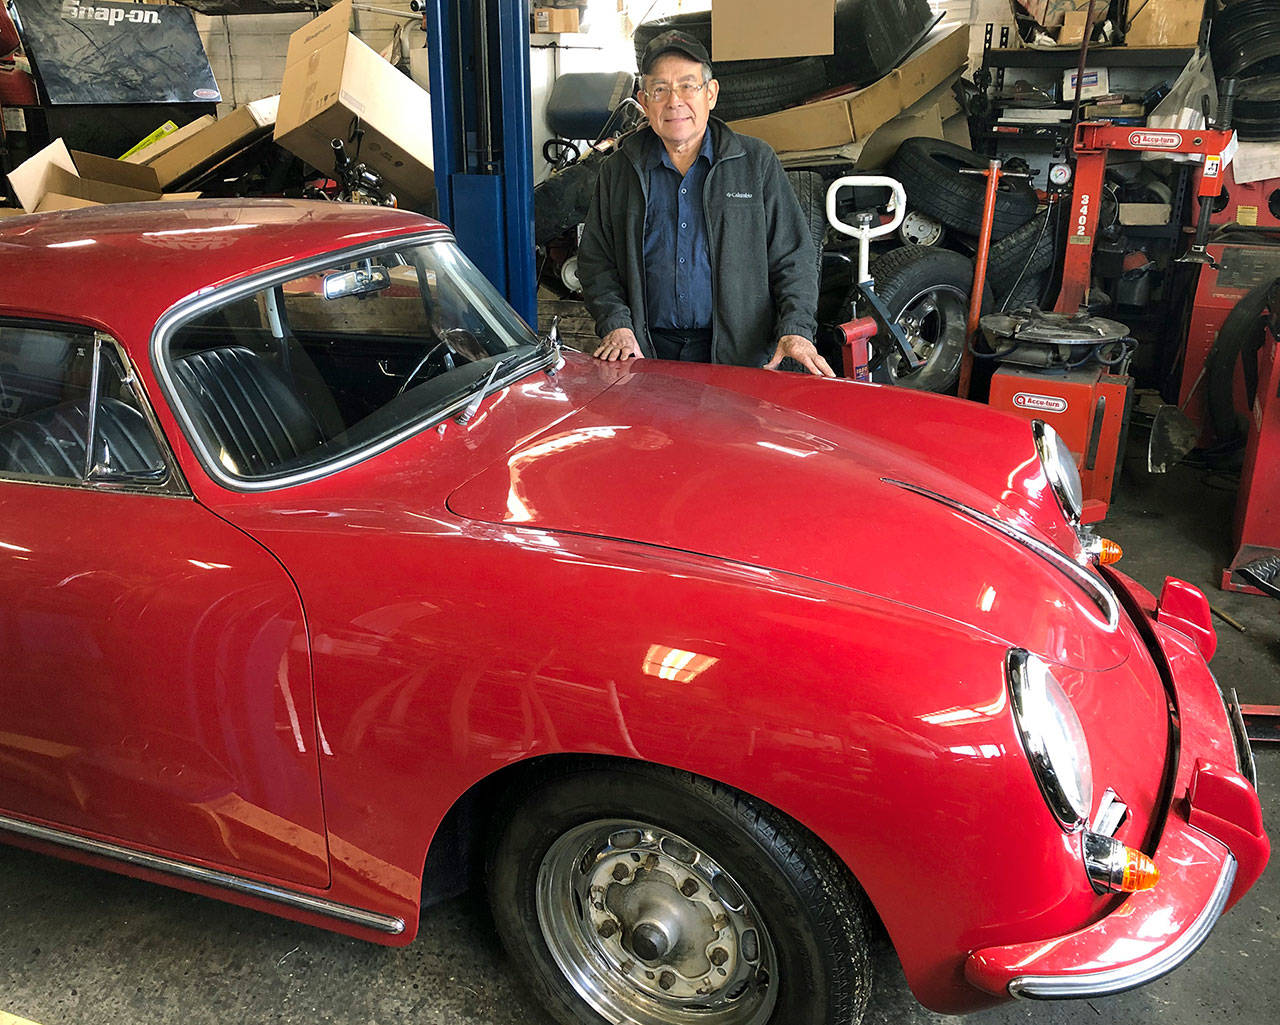 Marty Robinett with a customer’s ‘62 Porsche he is repairing. Robinett has many years of experience working on cars of all kinds. Photos by Harry Anderson